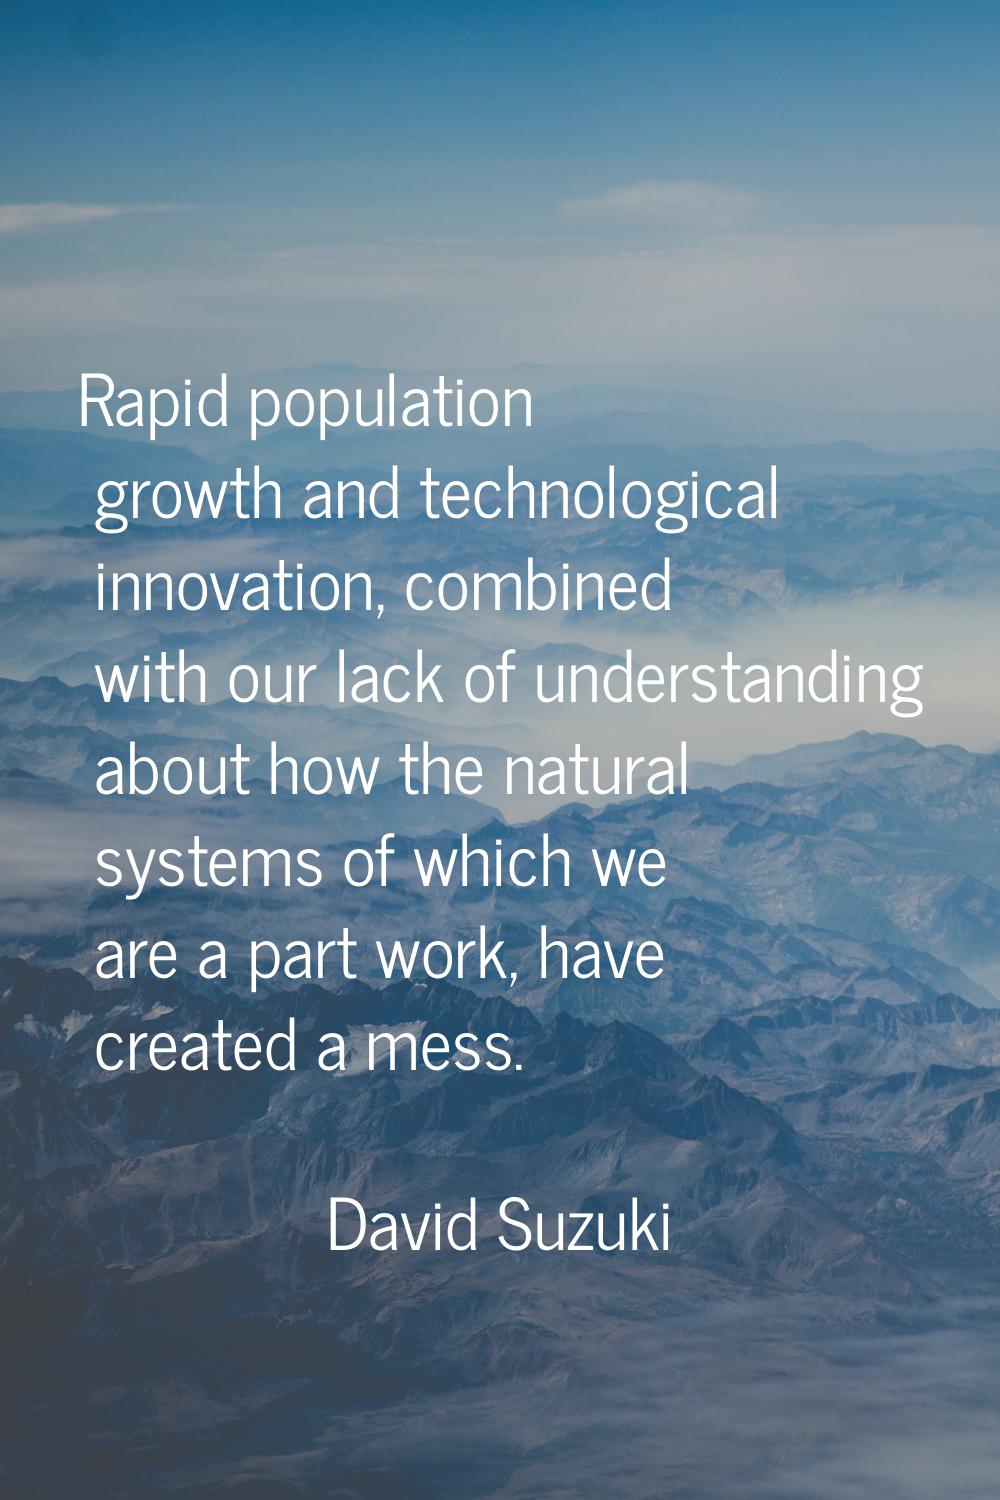 Rapid population growth and technological innovation, combined with our lack of understanding about